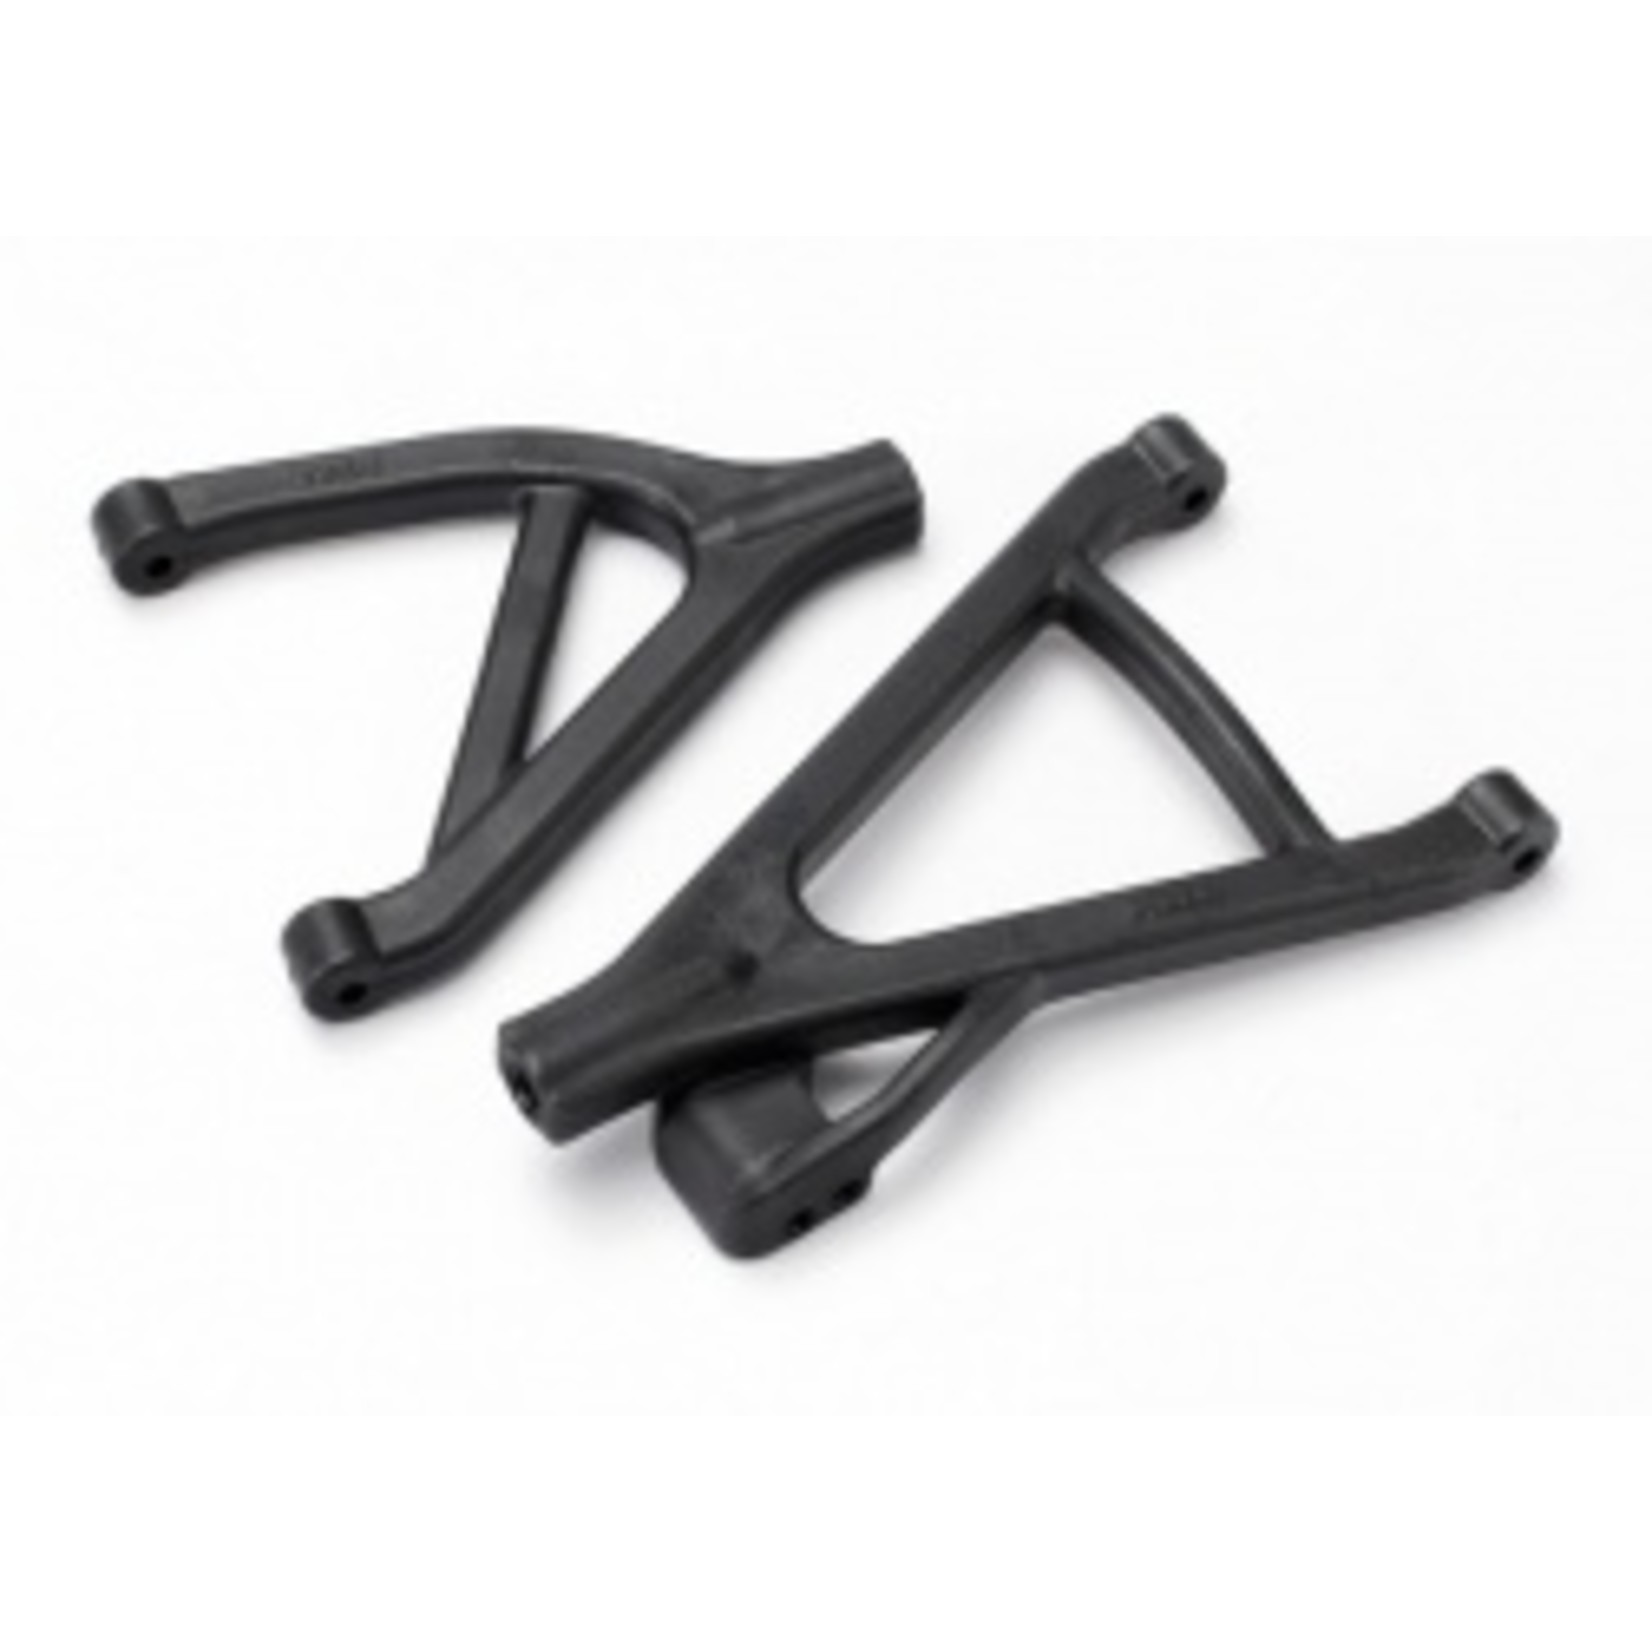 Traxxas Suspension arm upper (1)/ suspension arm lower (1) (right rear) (fits Slayer Pro 4x4)